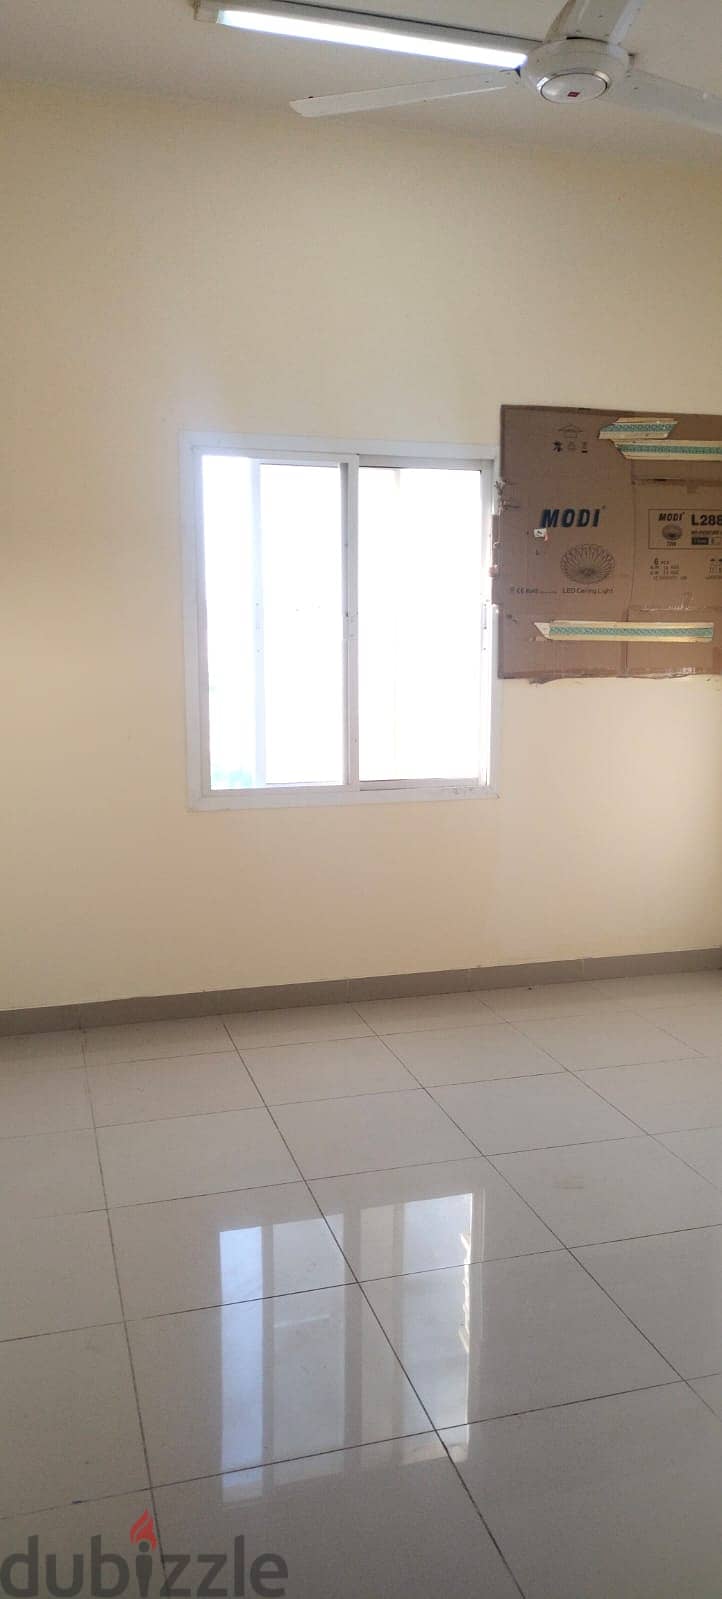 Flat 2 BHK For Rent in Hond road in Ruwi 4